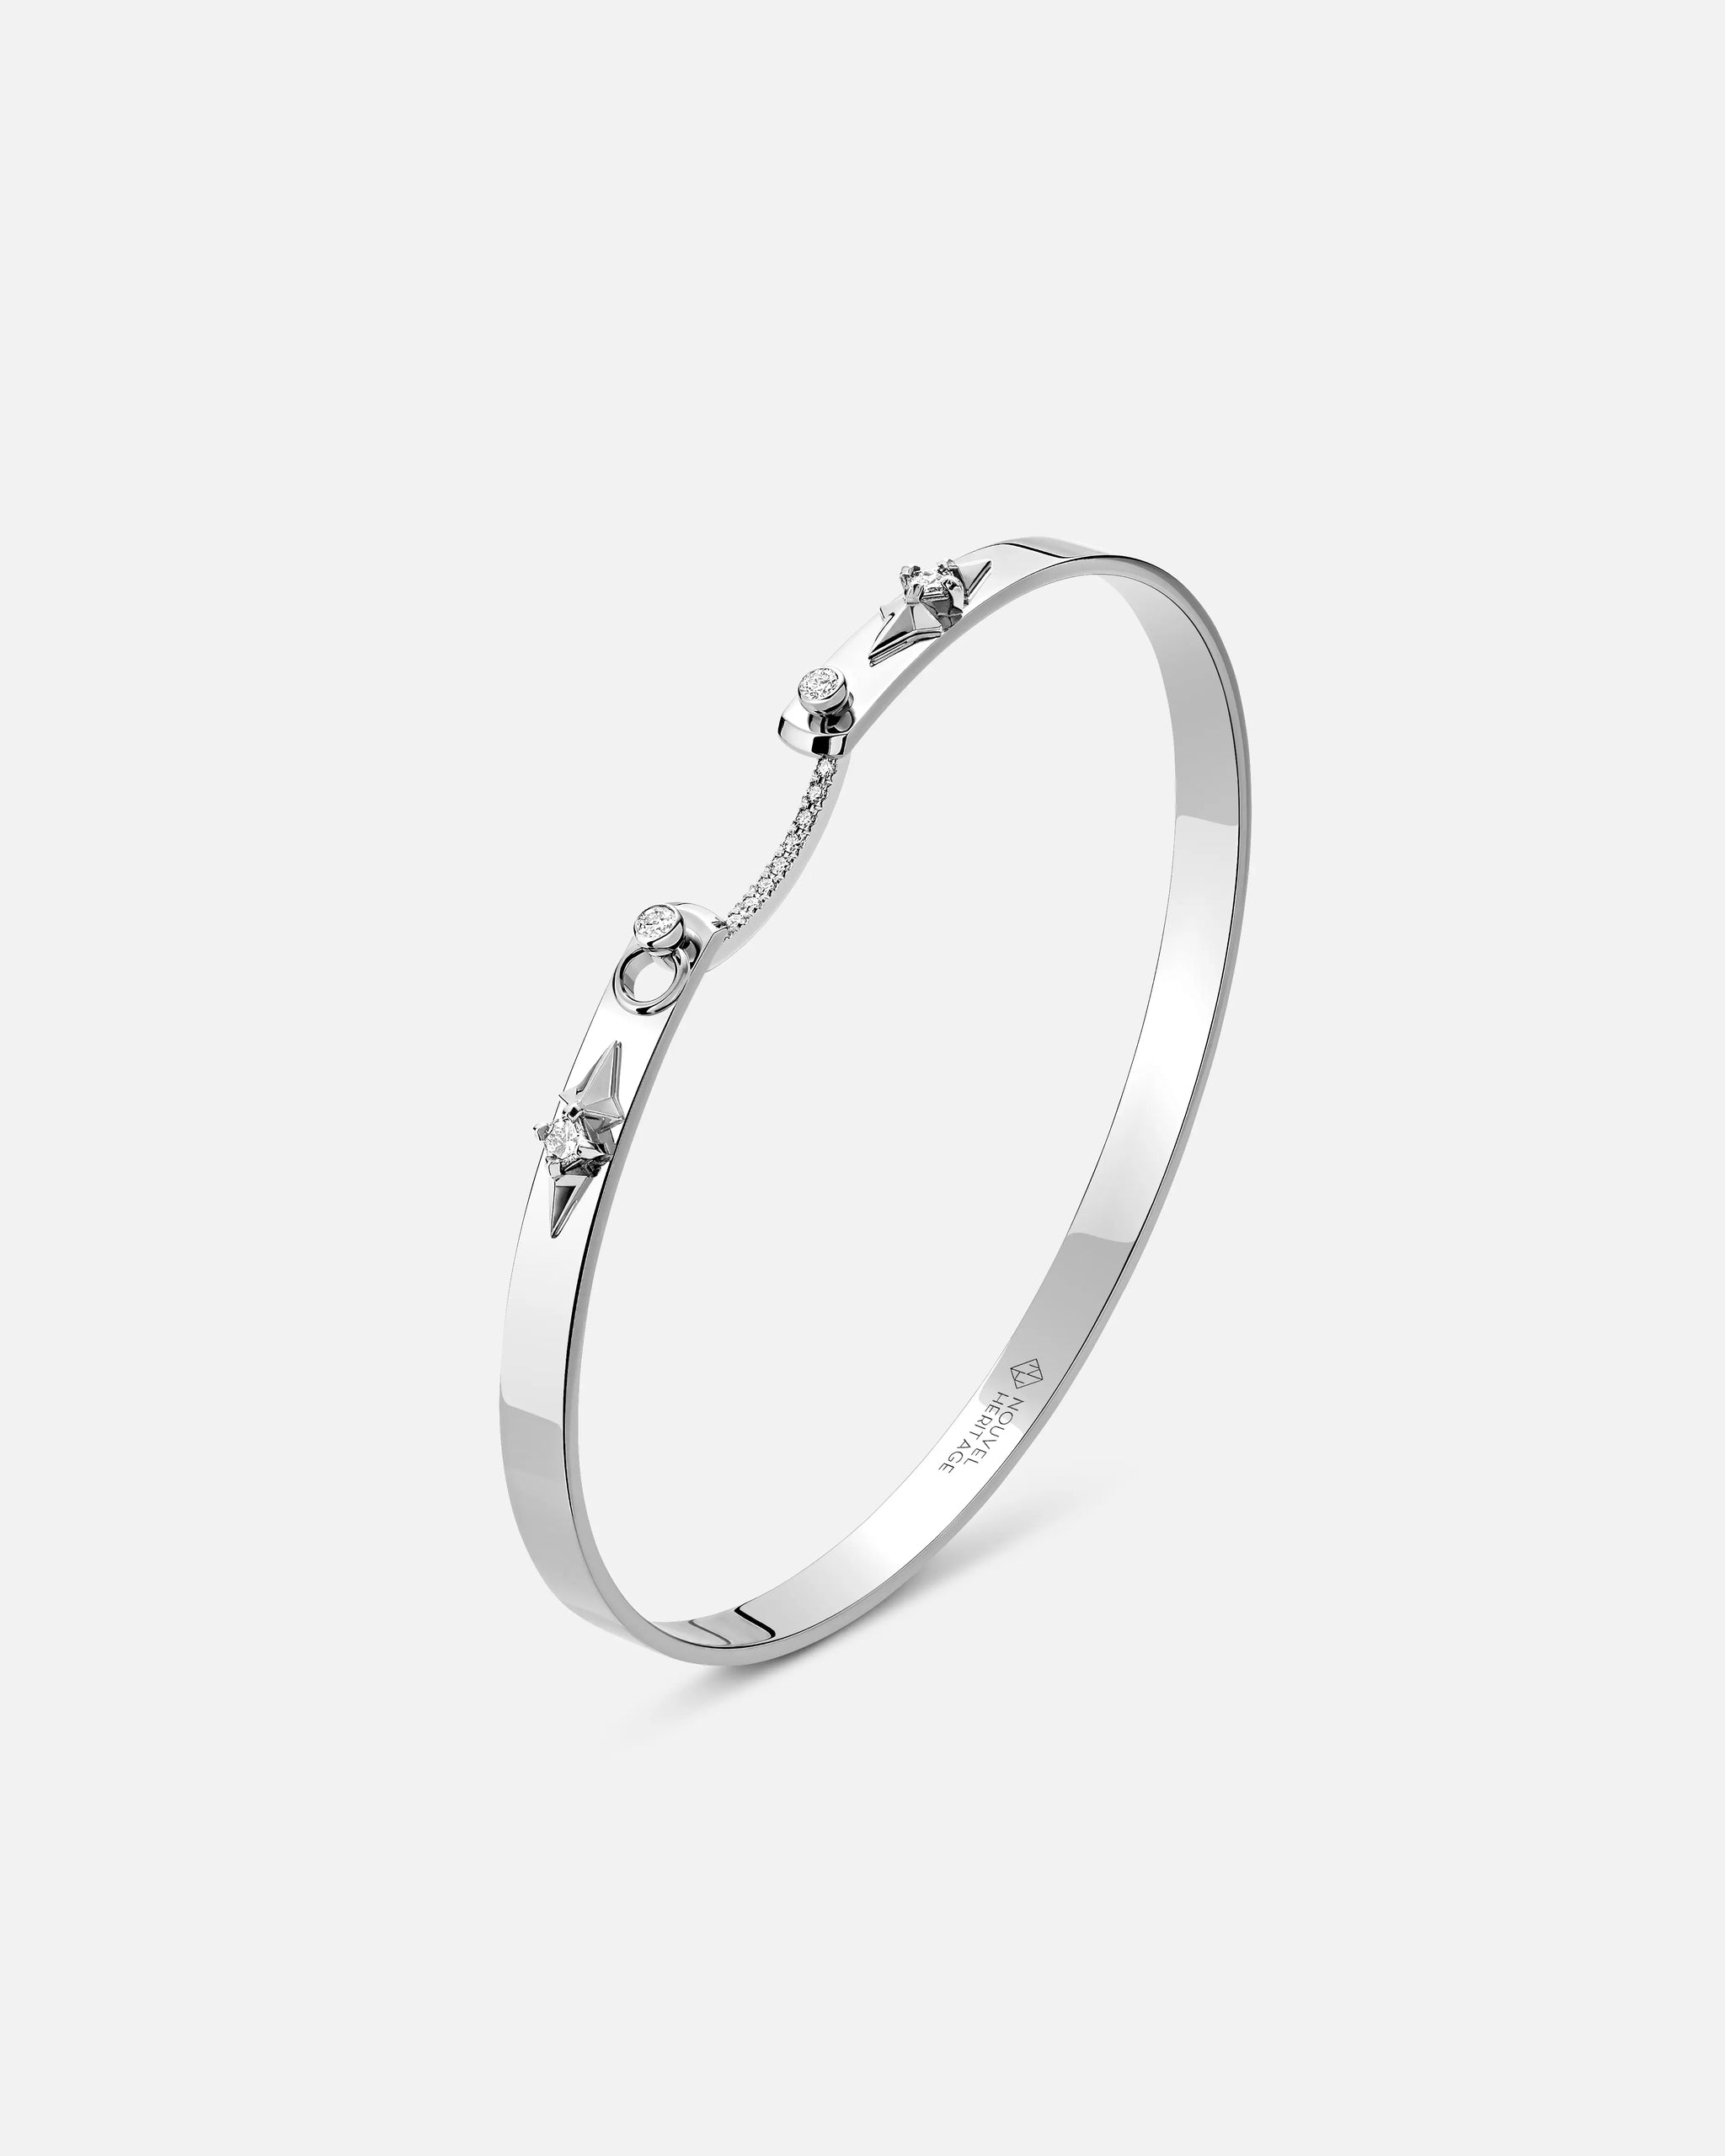 Reverie Mood Bangle in White Gold - 1 - Nouvel Heritage